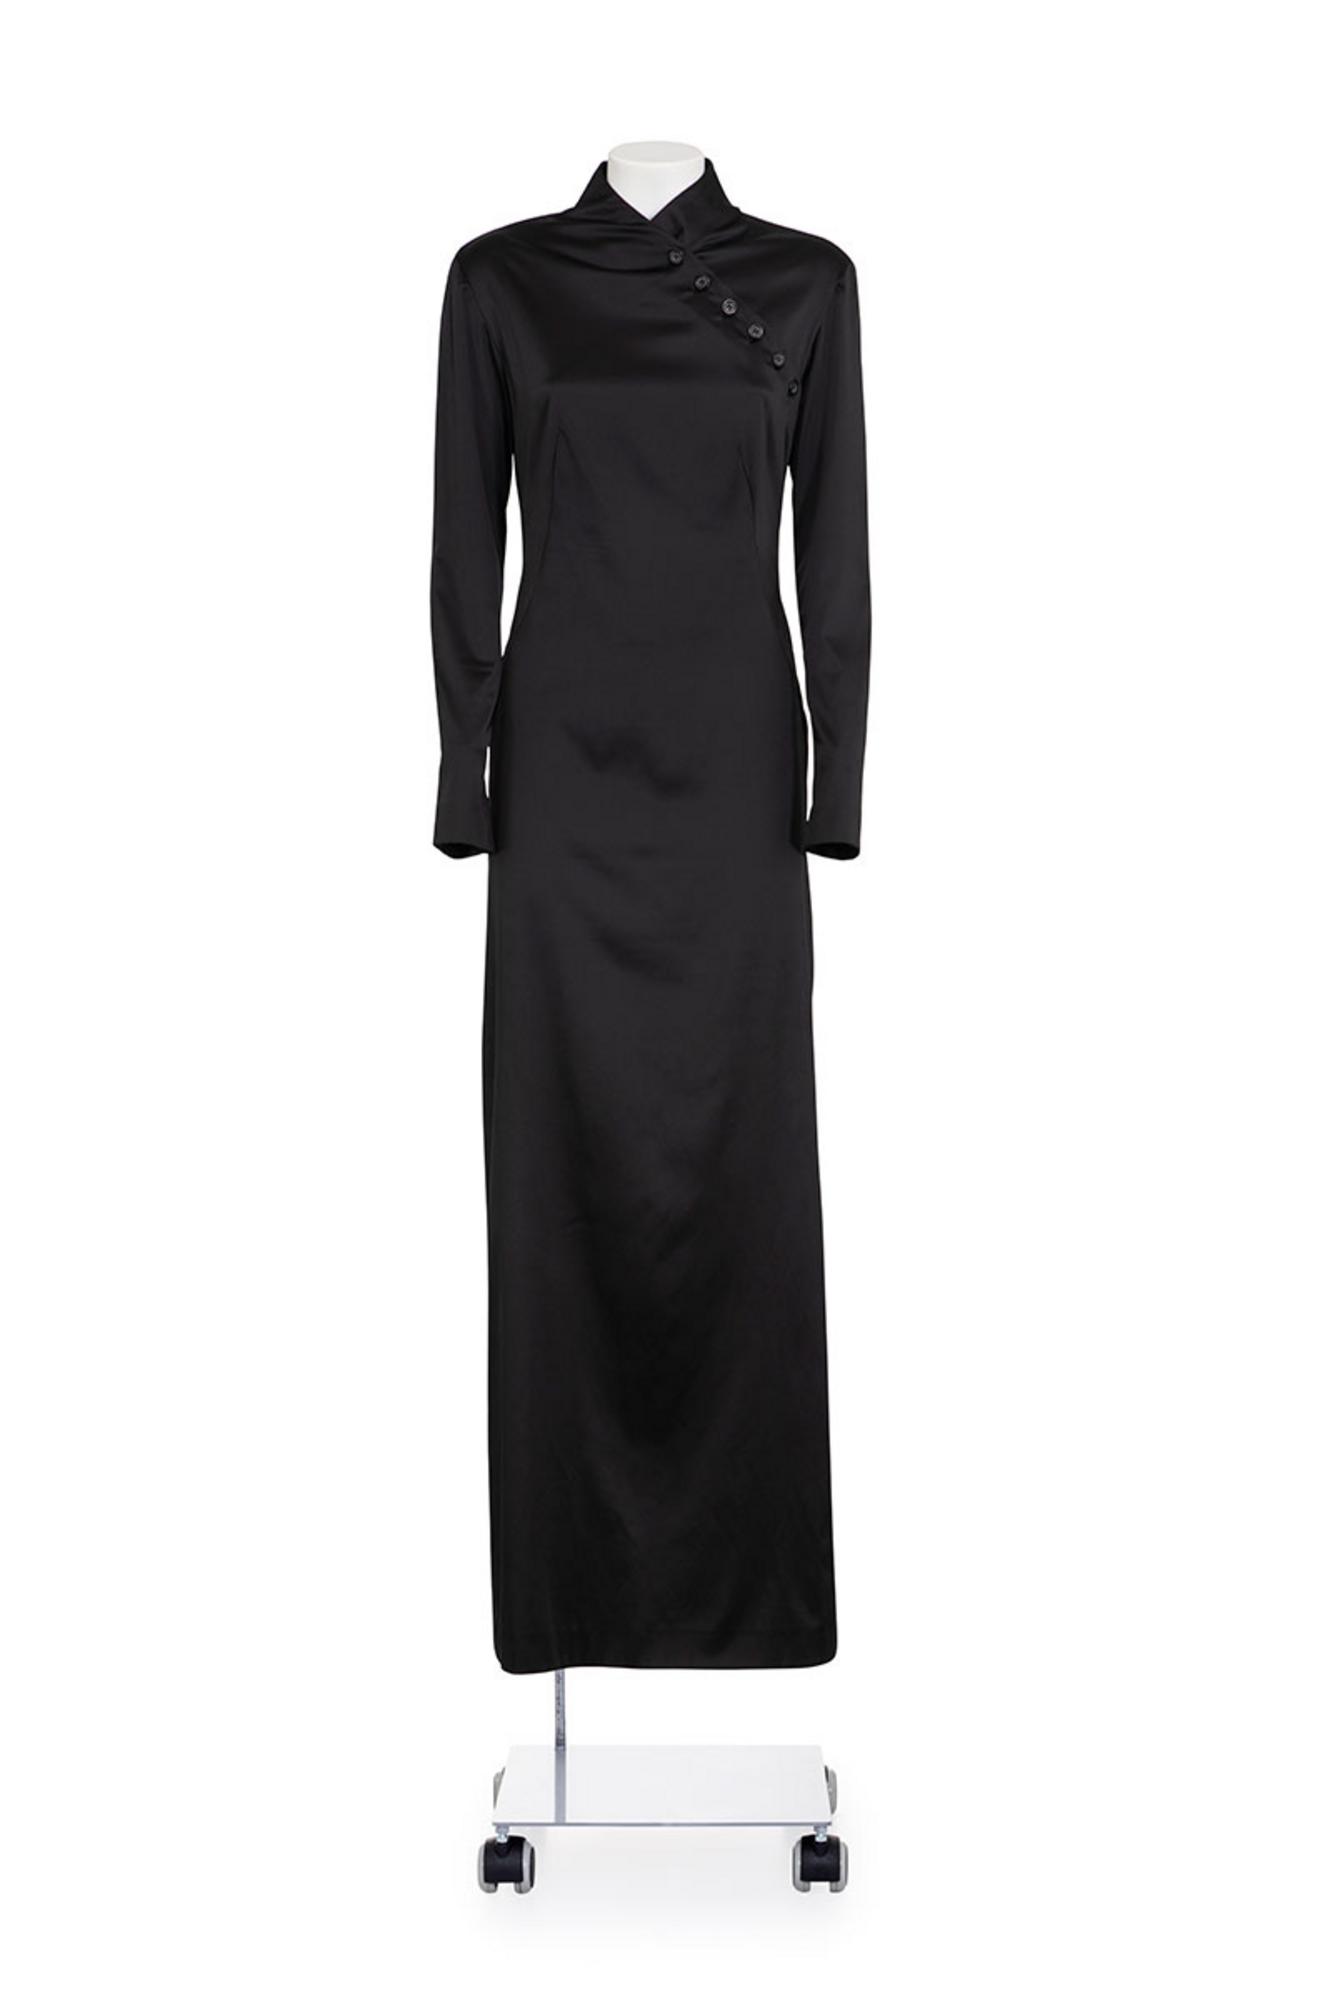 ALEXANDER McQUEEN Iconic stretched silk long dress DESCRIPTION: Iconic black...